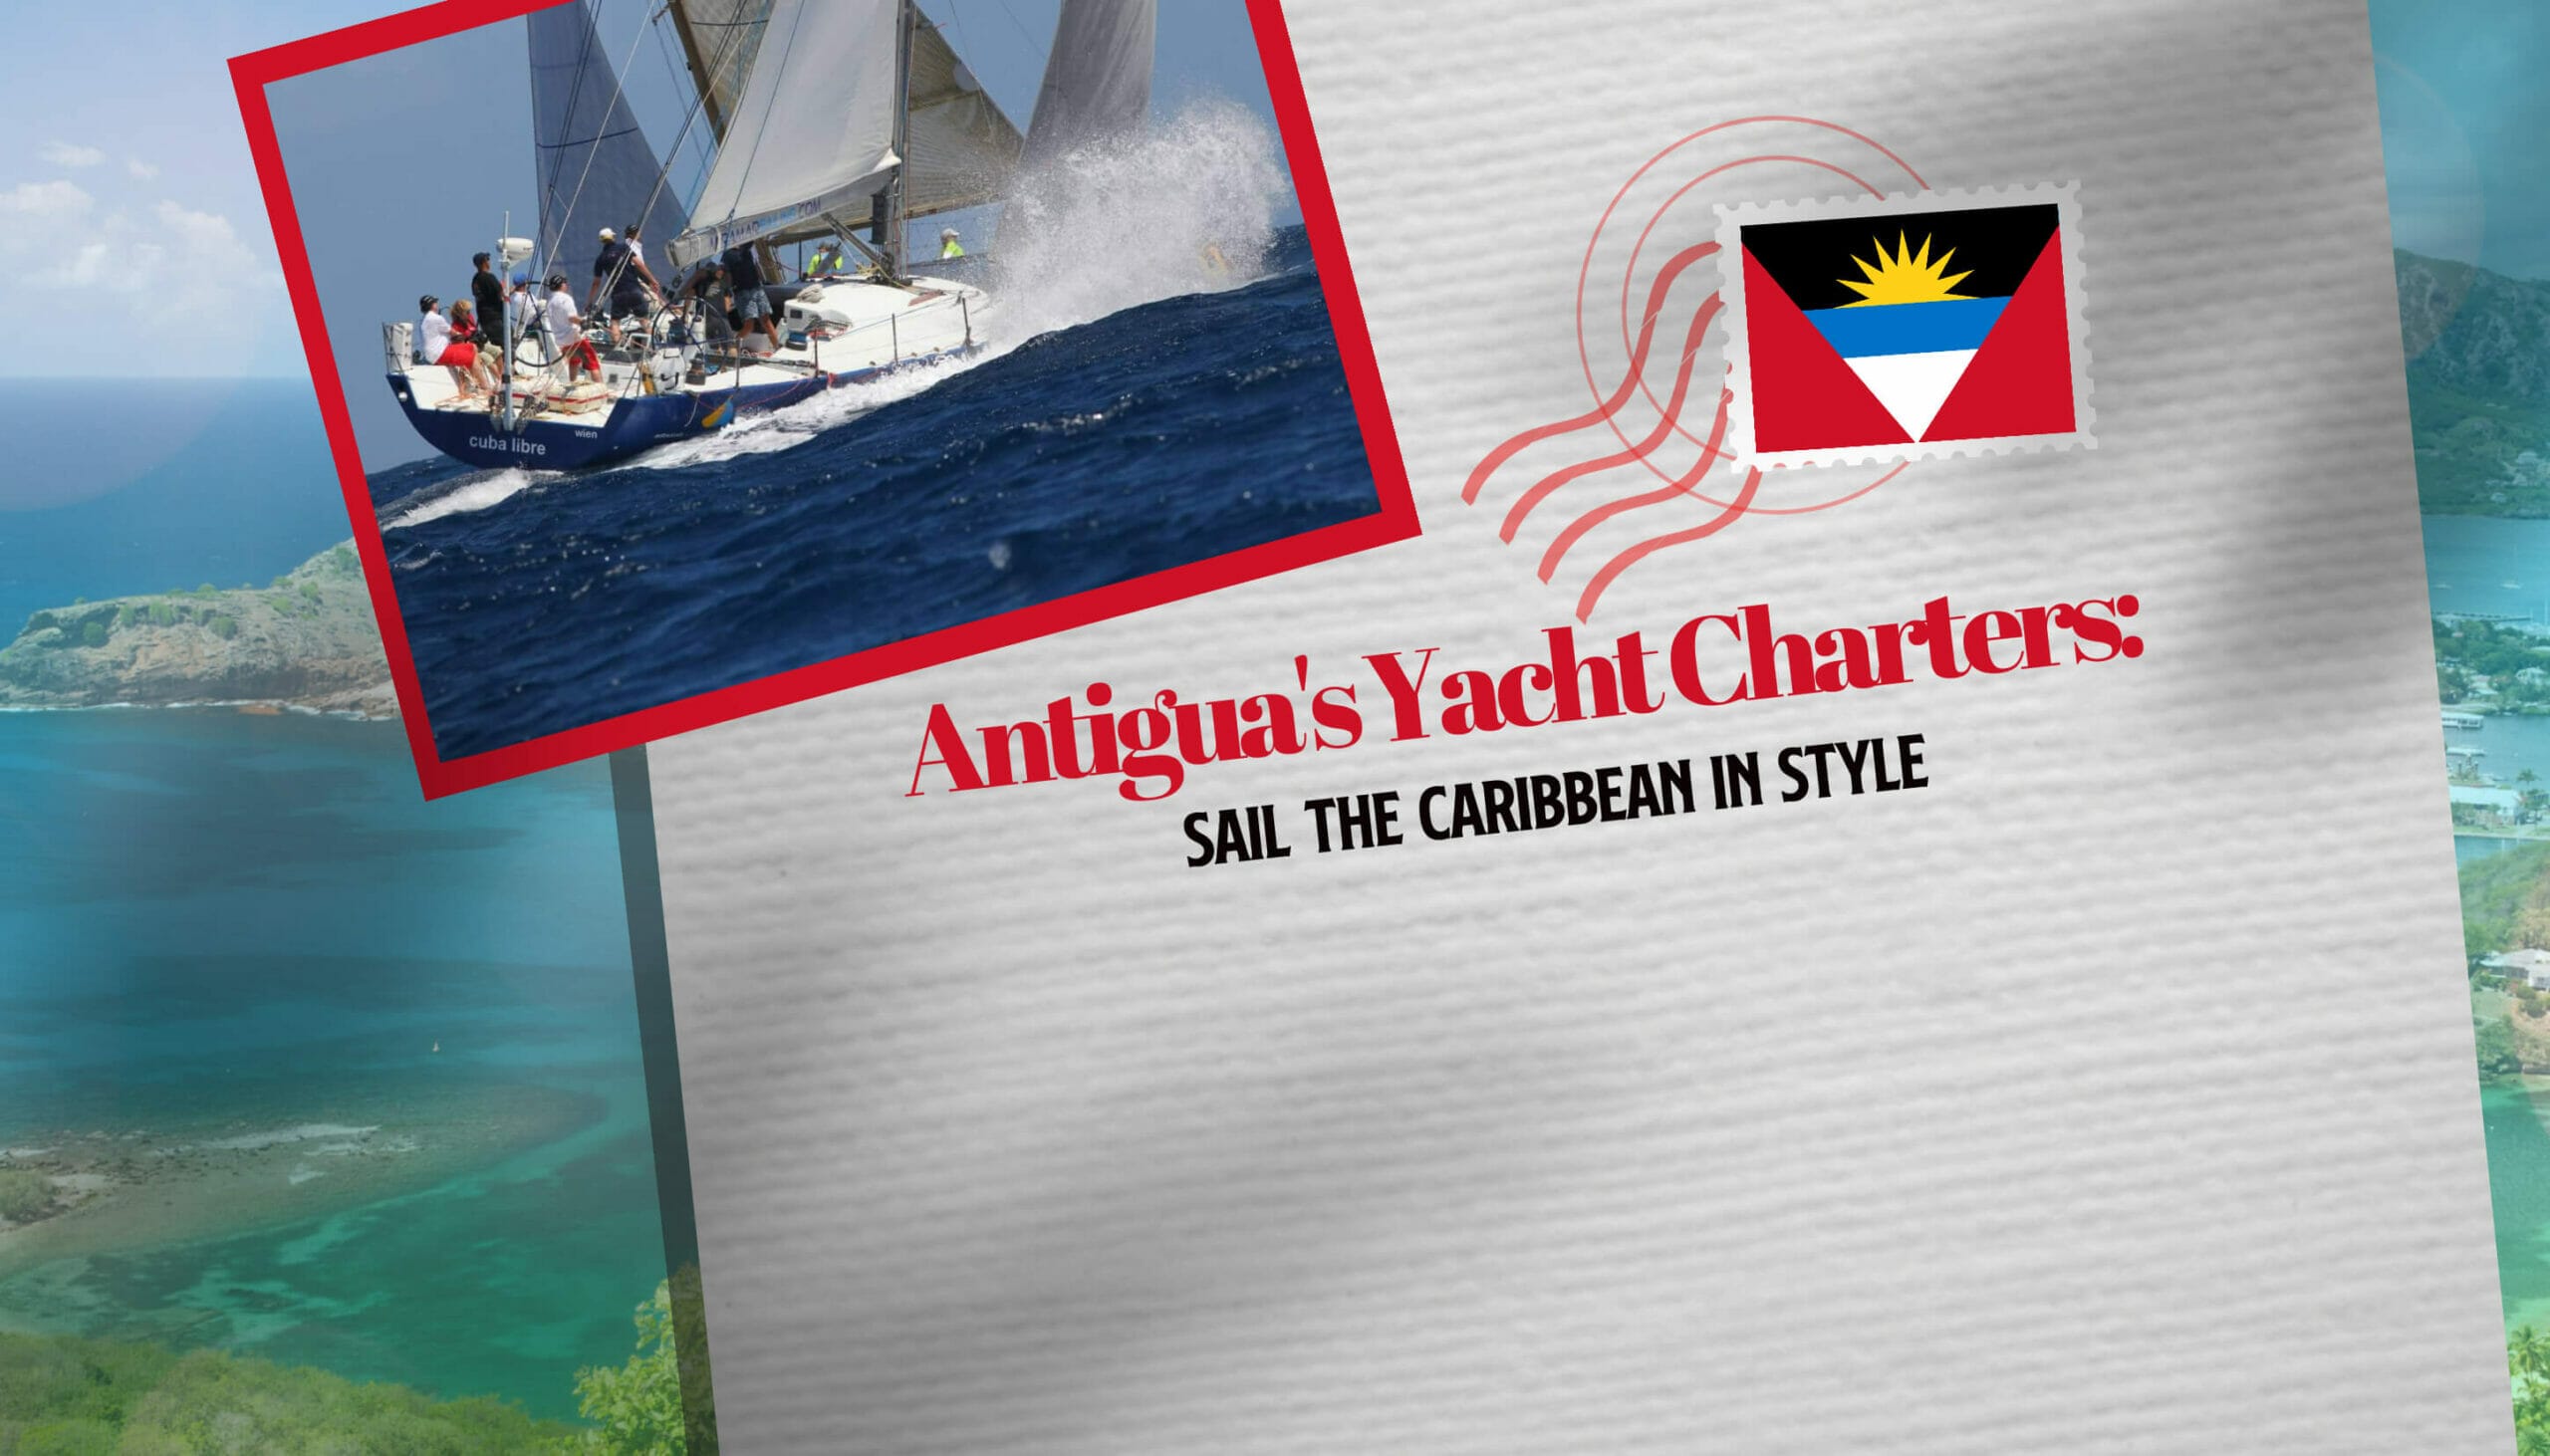 Antigua's Yacht Charters Sail the Caribbean in Style